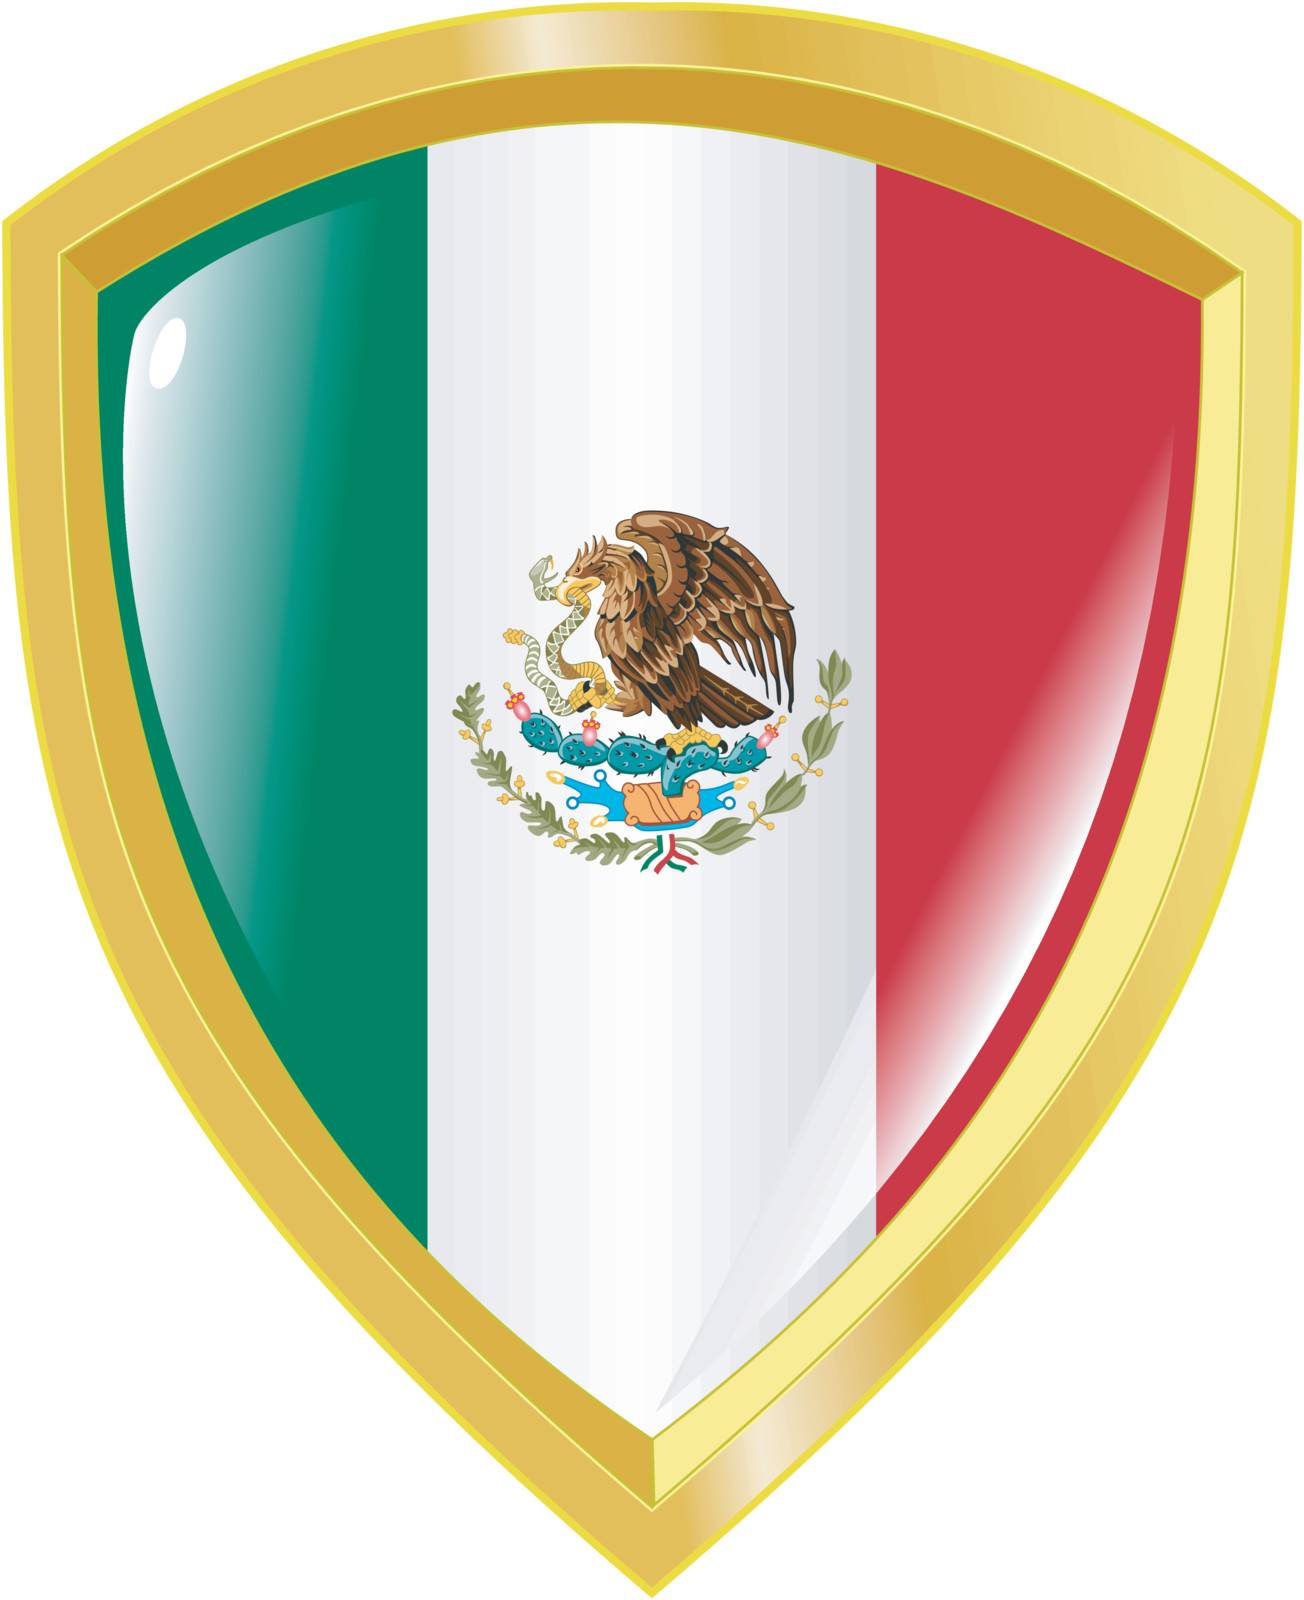 emblem of Mexico by Perysty